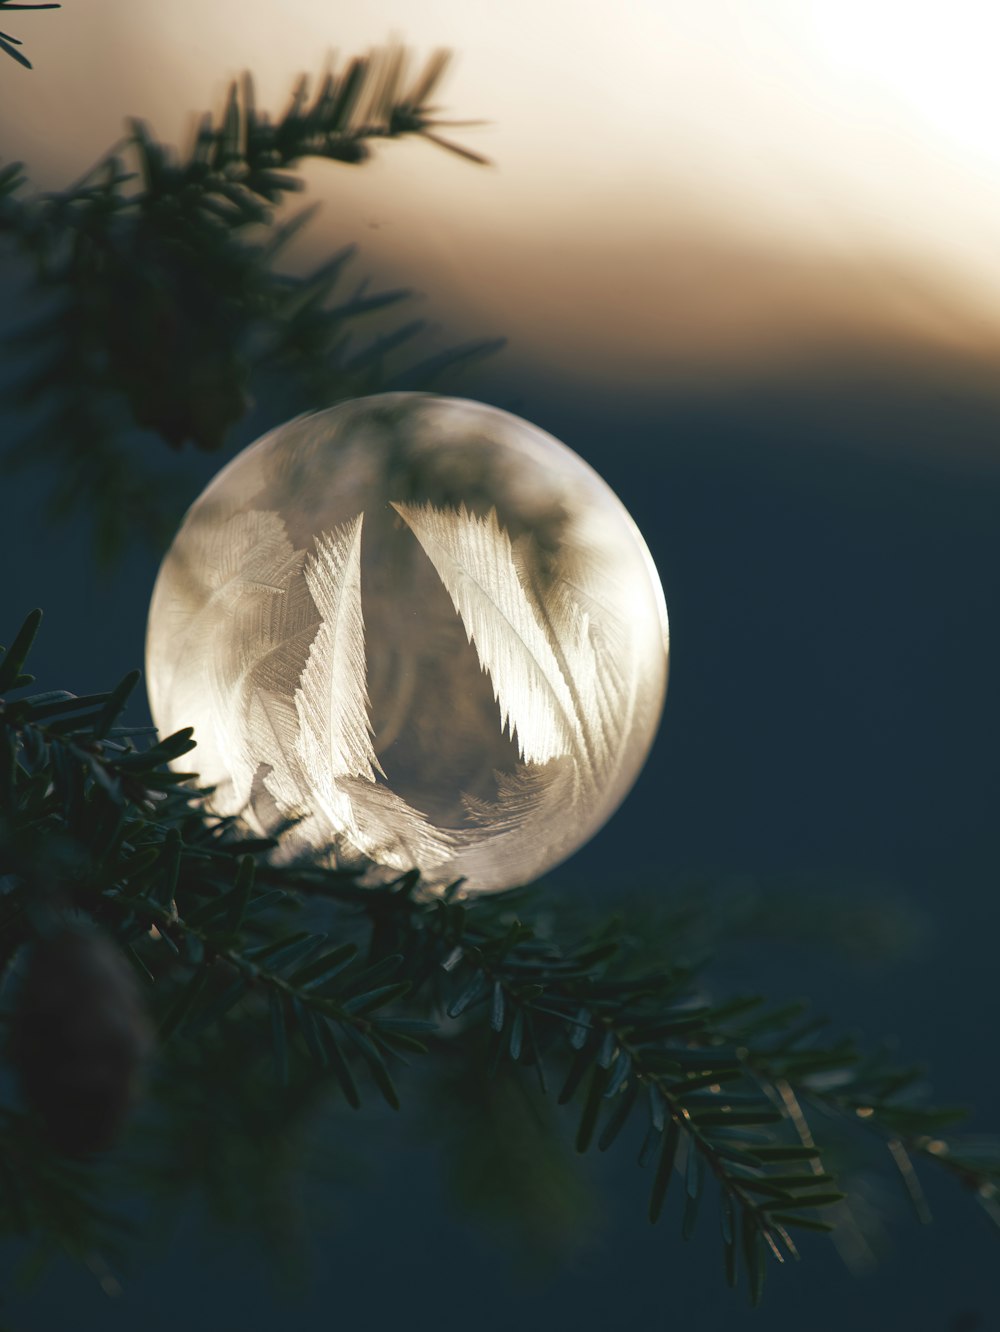 a glass ornament hanging from a pine tree